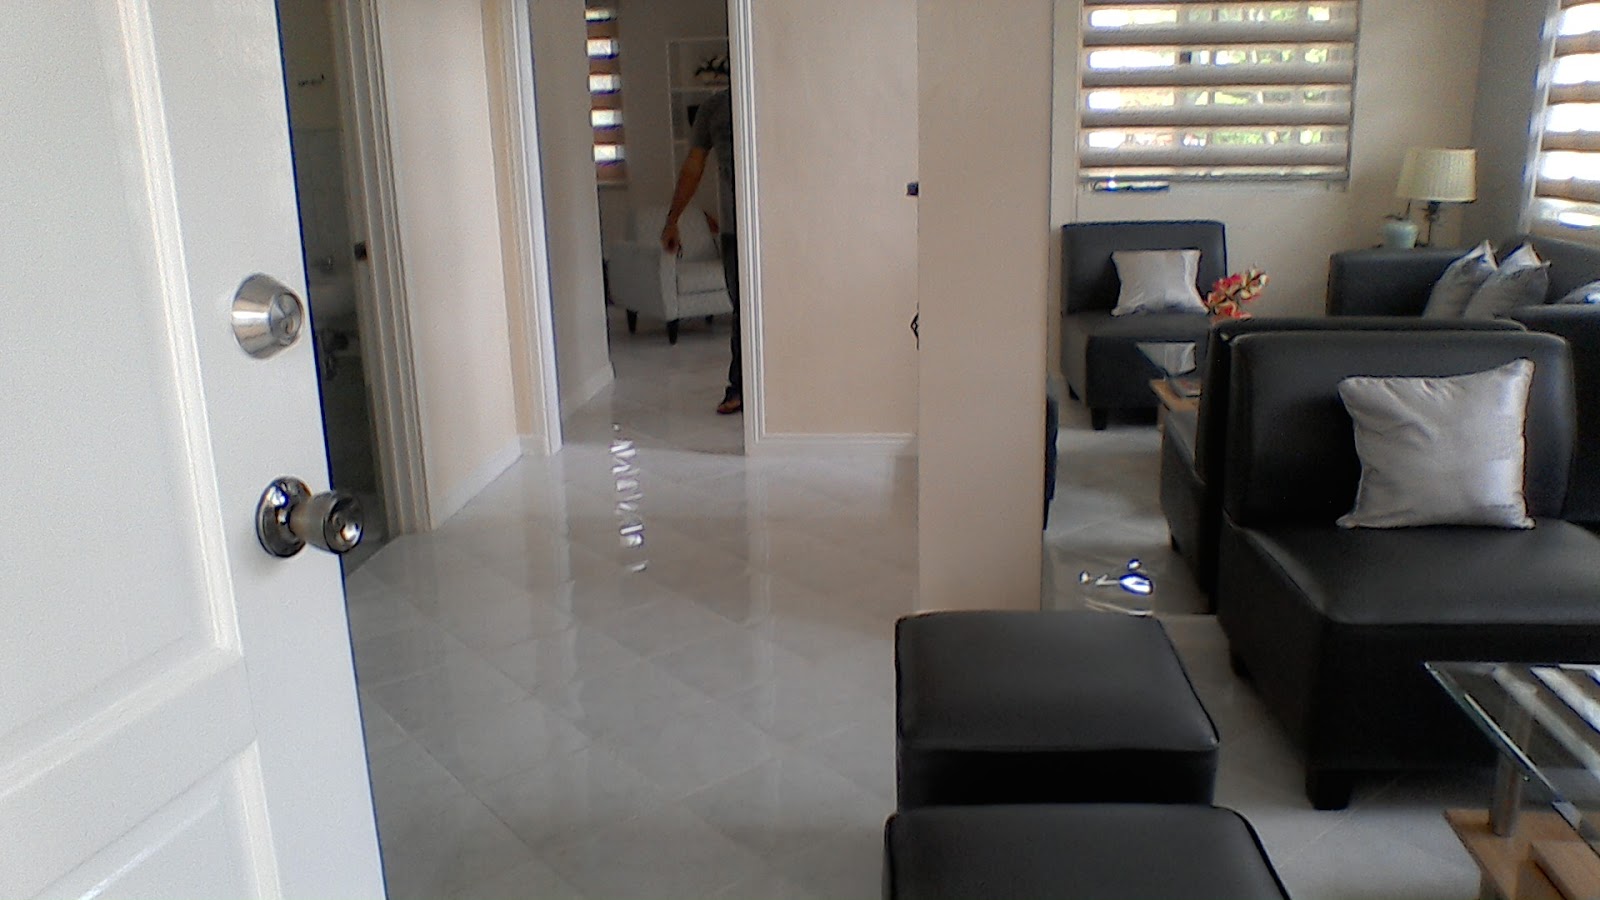 4 Bedrooms 3 Toilet & Bath, Jazmine model house and lot for sale